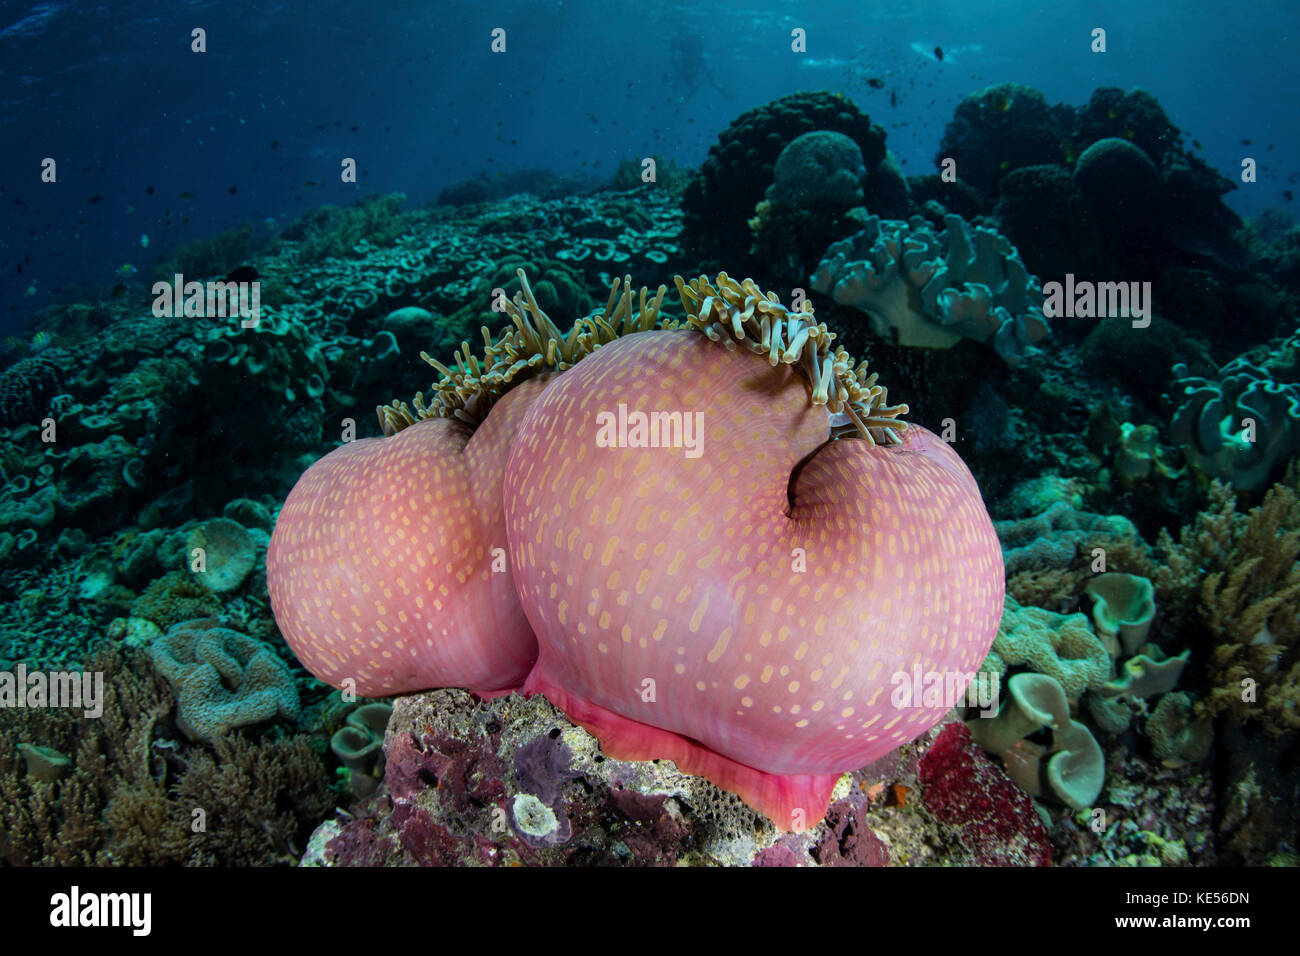 A magnificent sea anemone grows on a fragile reef in Komodo National Park. Stock Photo